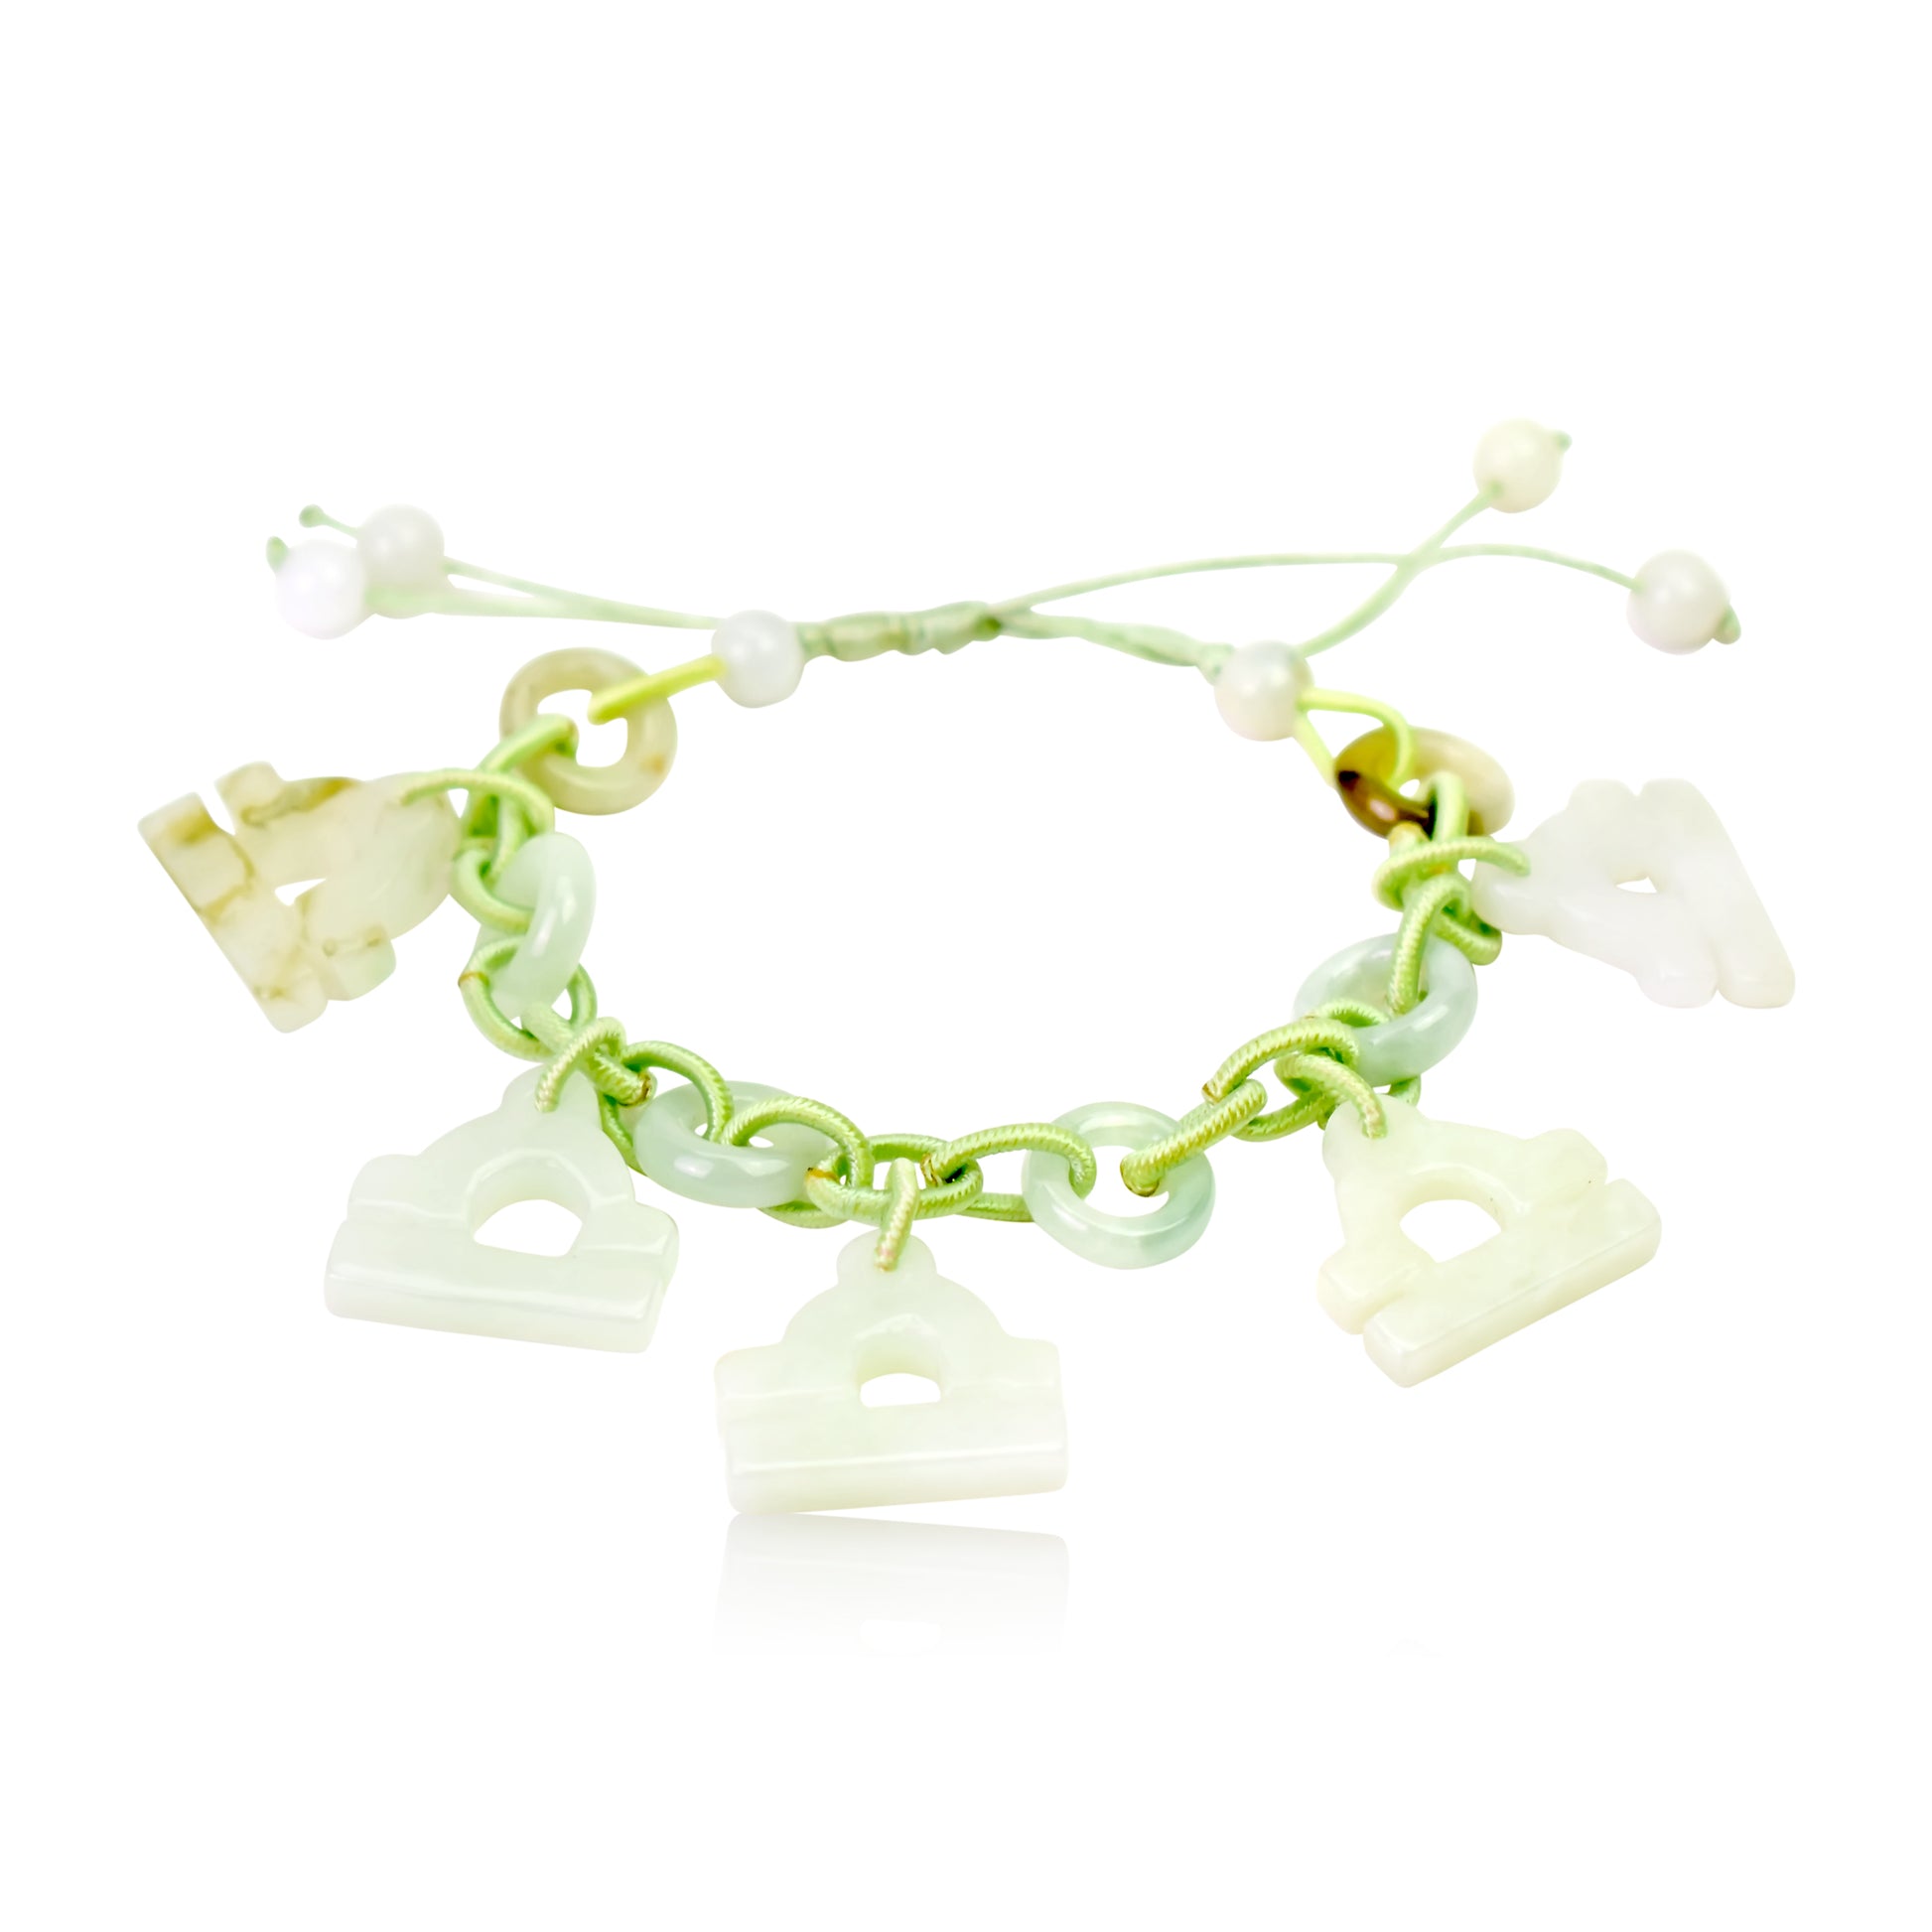 Symbolize your Libra Pride with a Handmade Jade Bracelet made with Sea Green Cord